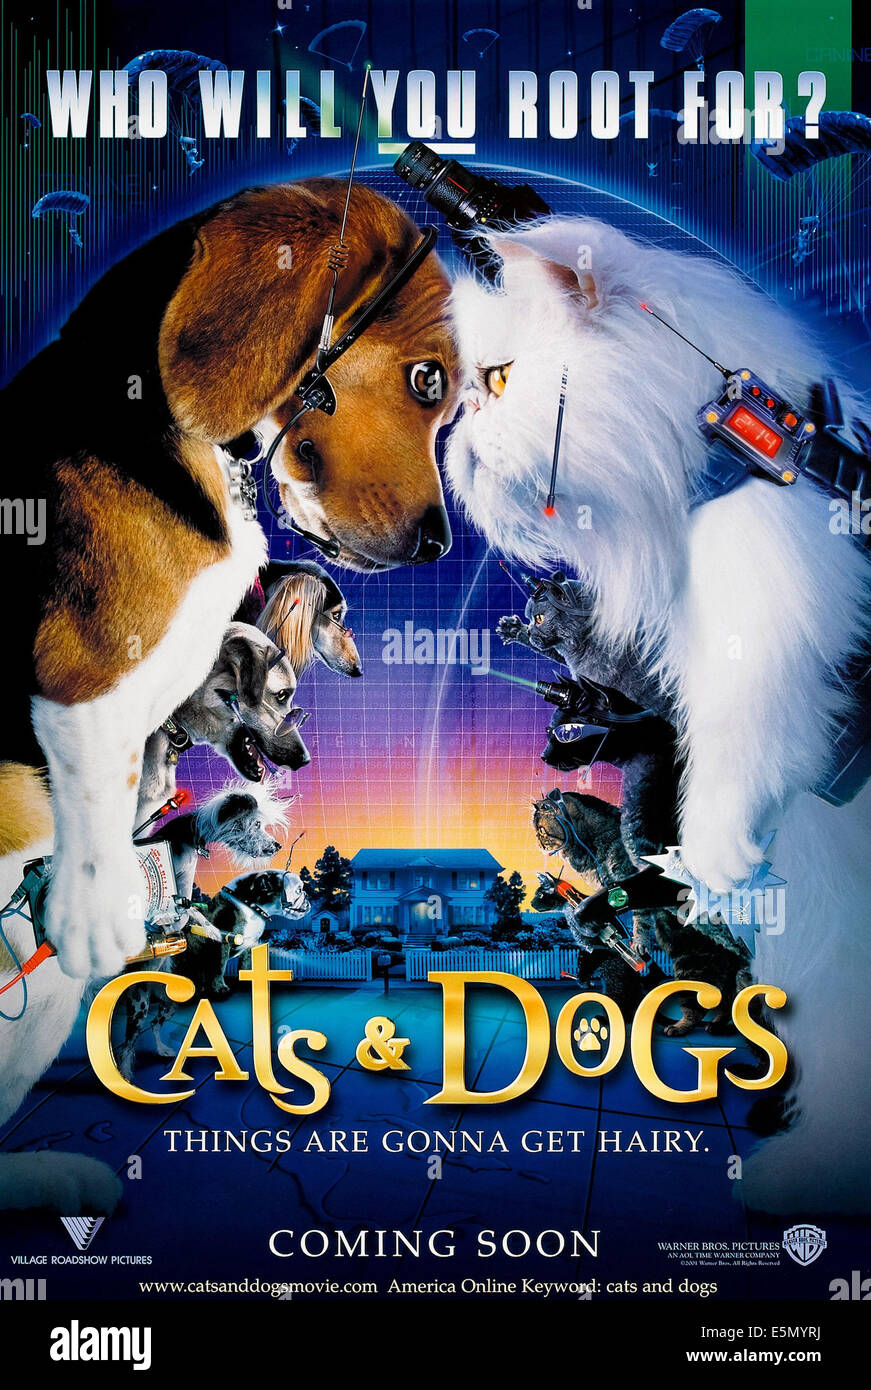 CATS AND DOGS, (aka CATS & DOGS), US advance poster art, 2001, ©Warner Bros./courtesy Everett Collection Stock Photo